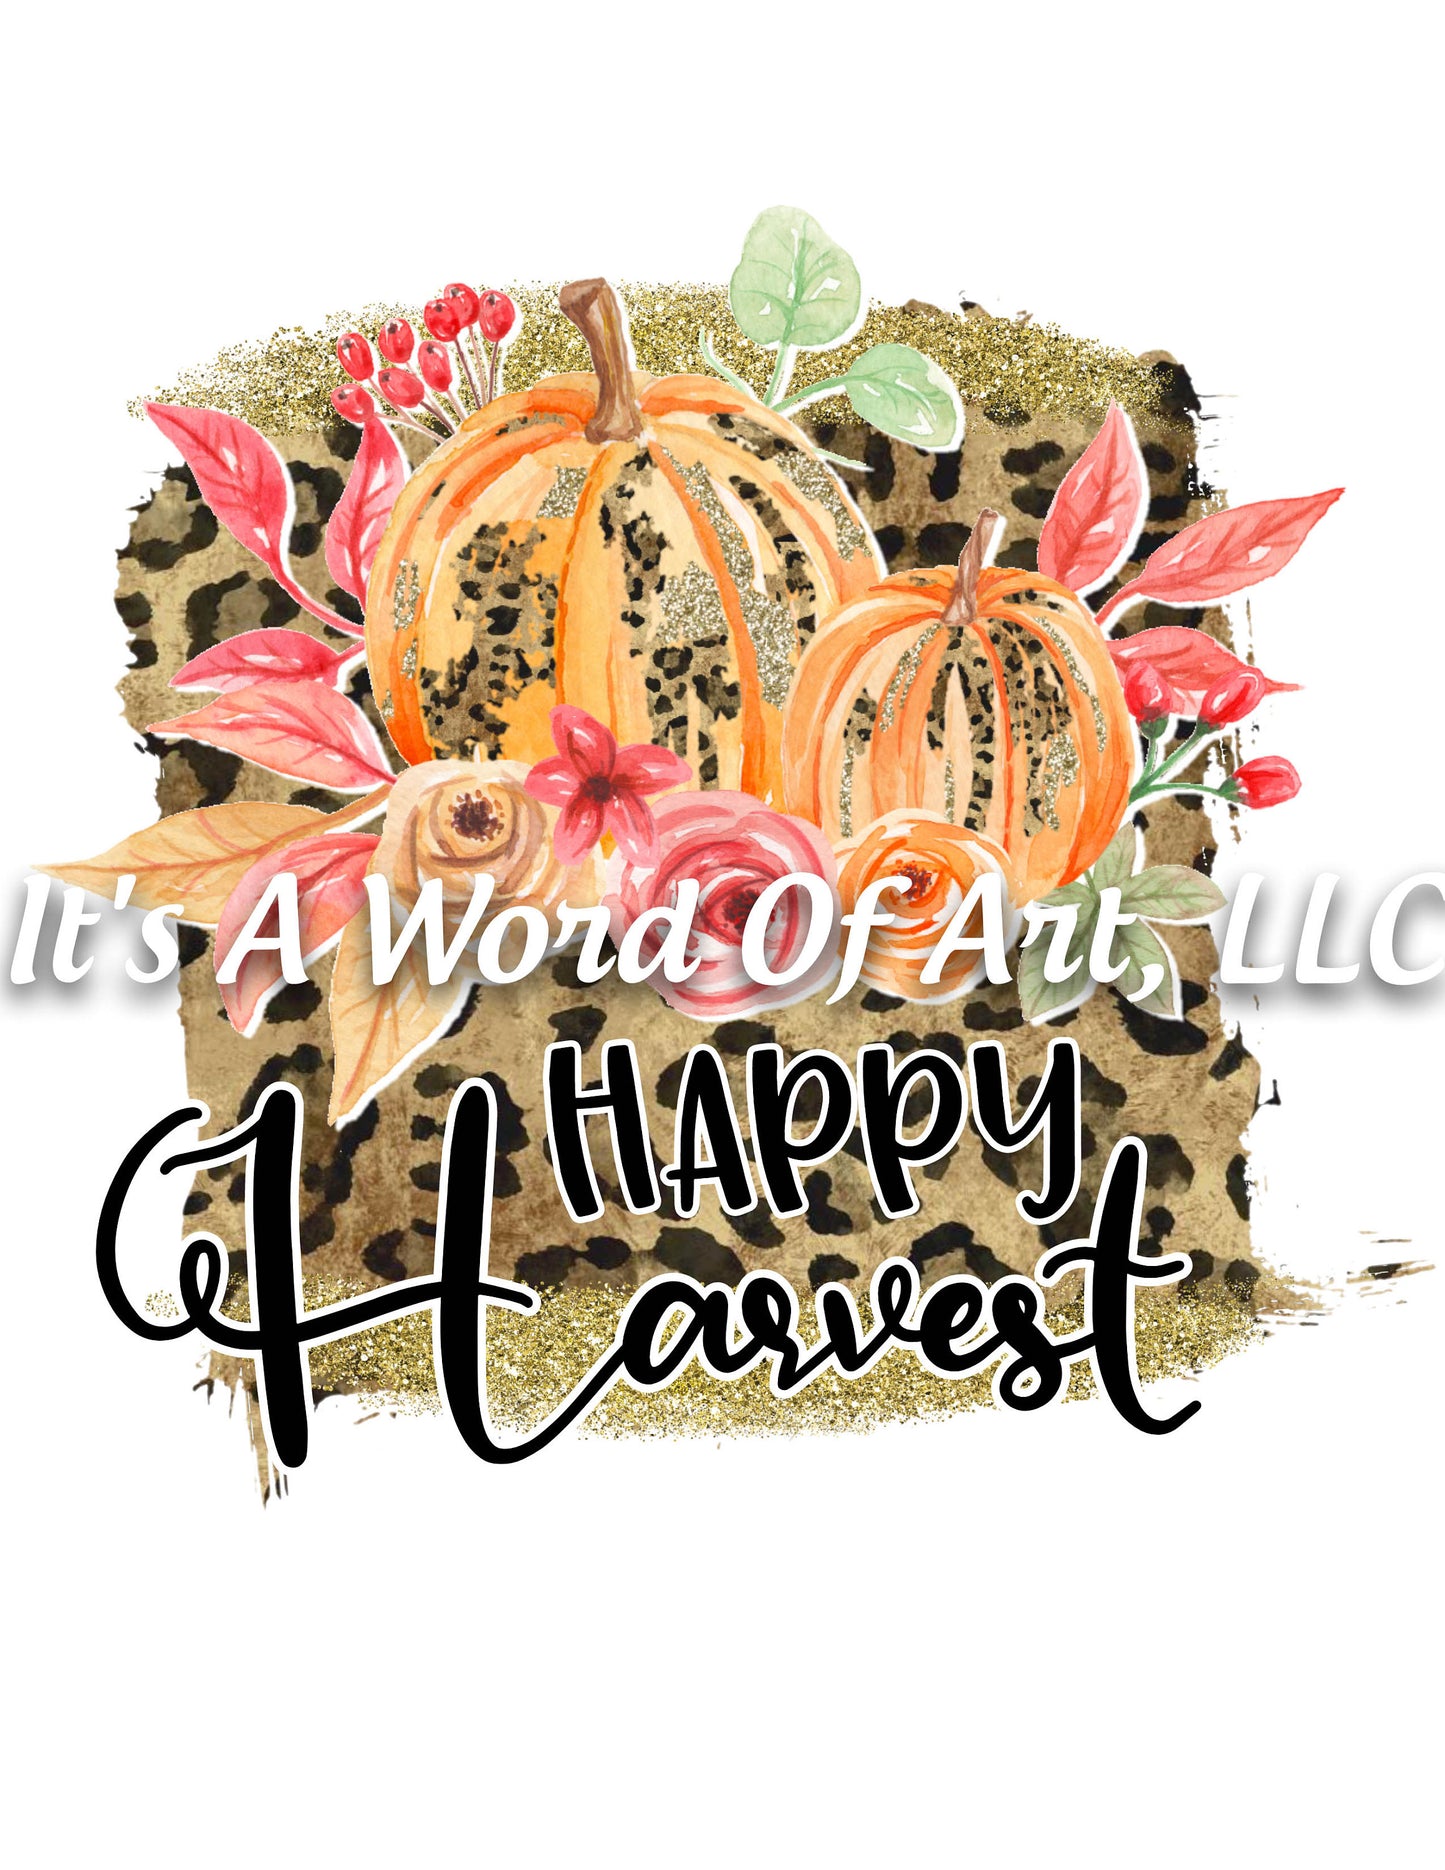 Fall 06 - Happy Harvest Leopard Autumn Pumpkin Leaves - Sublimation Transfer Set/Ready To Press Sublimation Transfer Sub Transfer